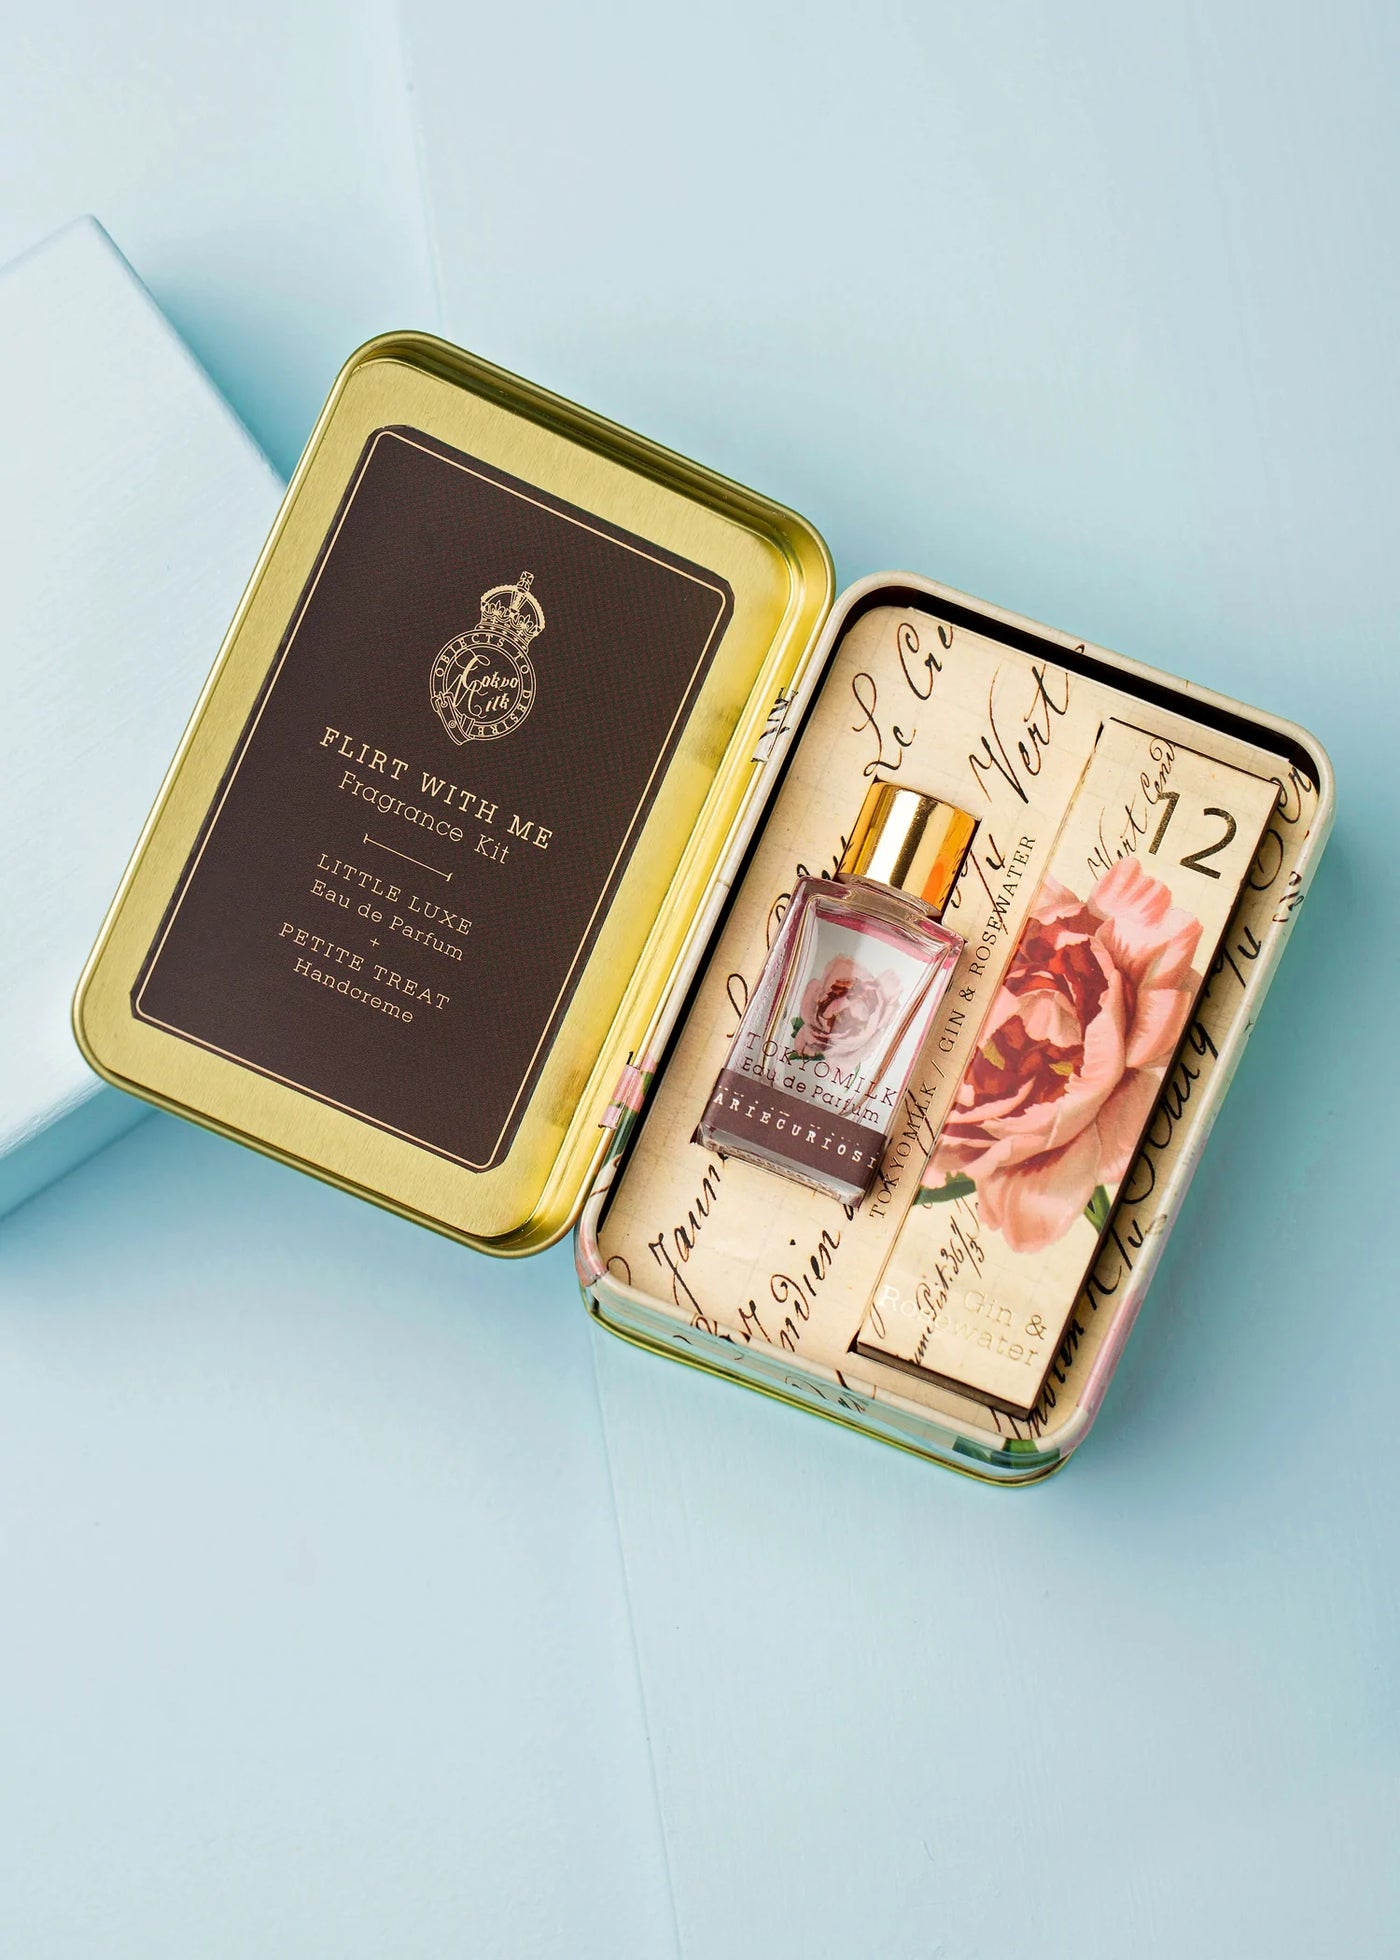 Gin & Rosewater Flirt With Me Fragrance Kit